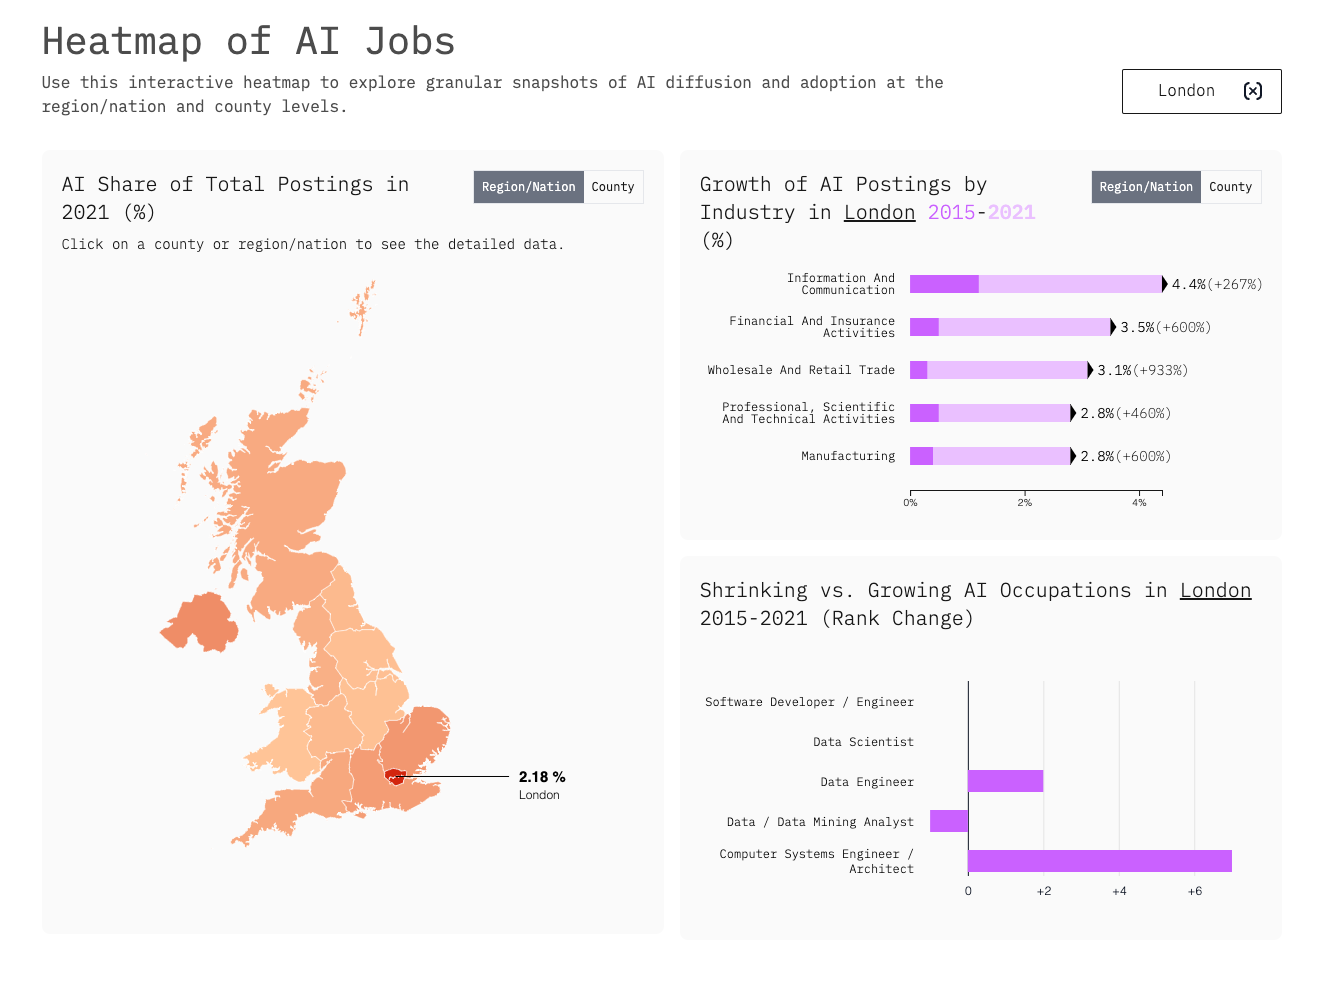 Map showing frequency of AI postings and skills by UK region